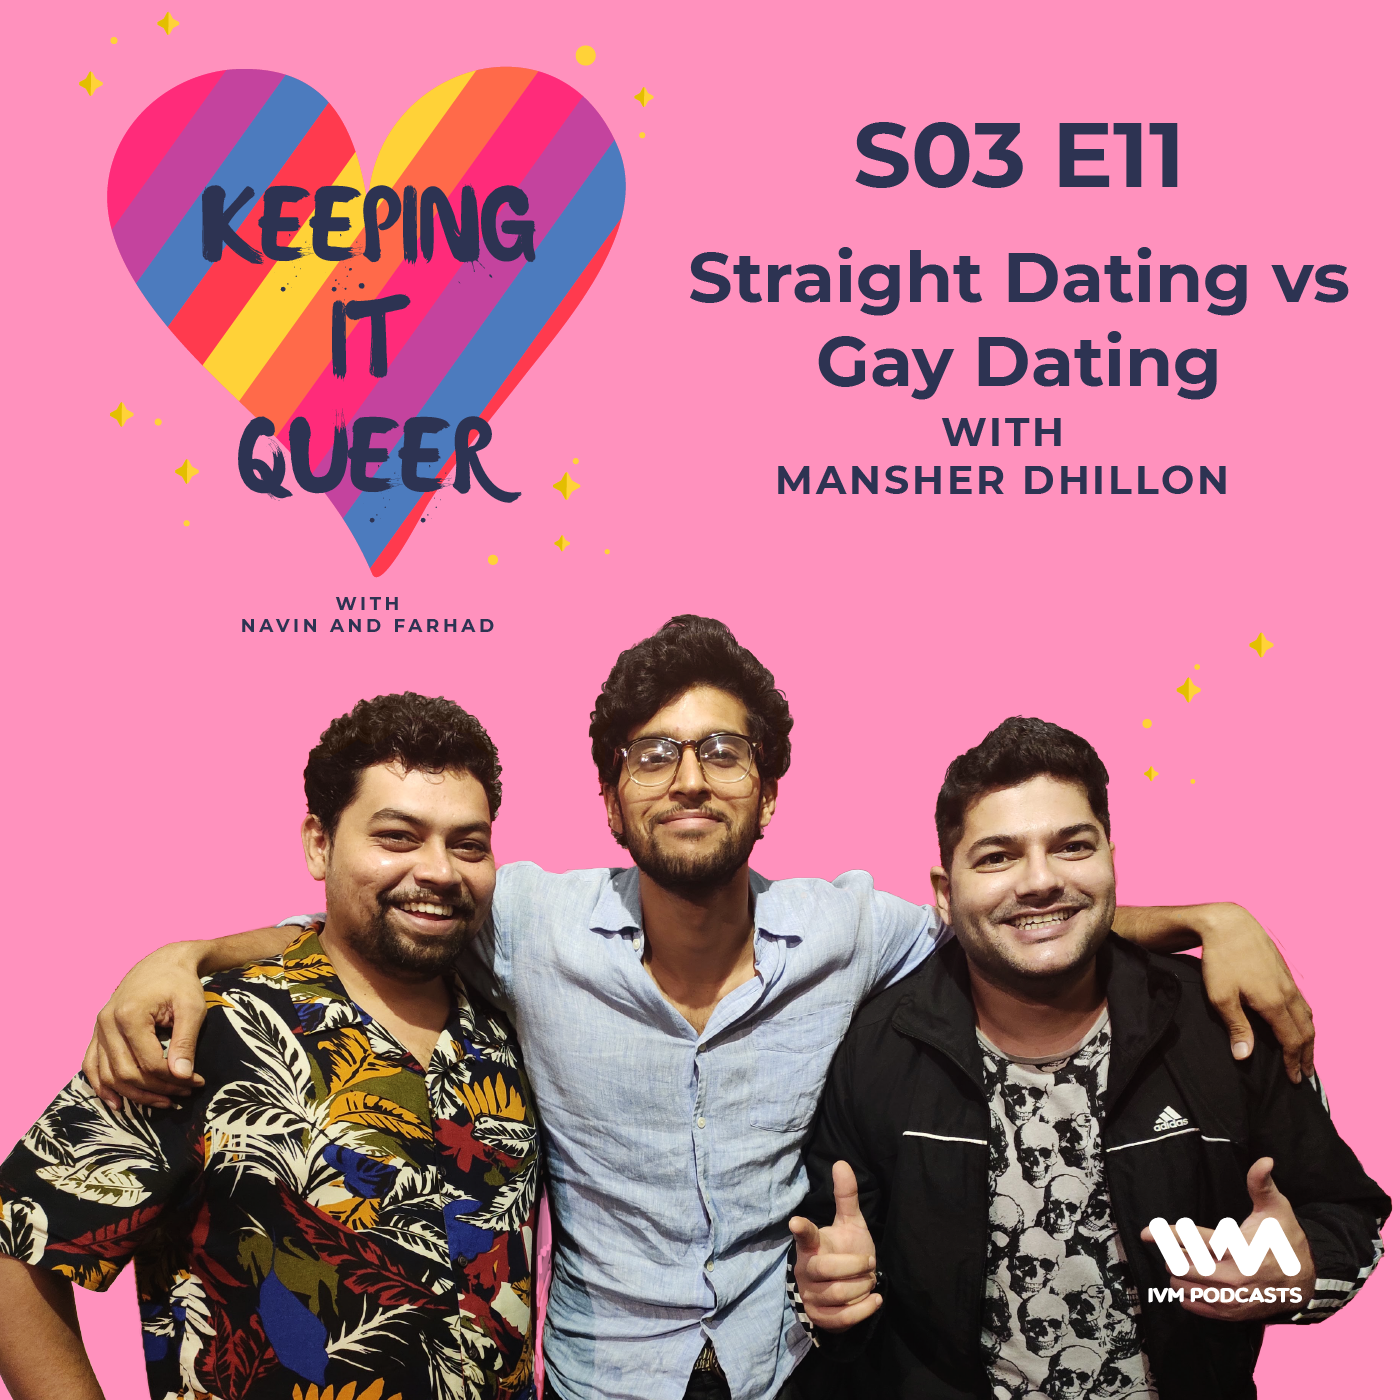 S03 E11: Straight Dating vs Gay Dating